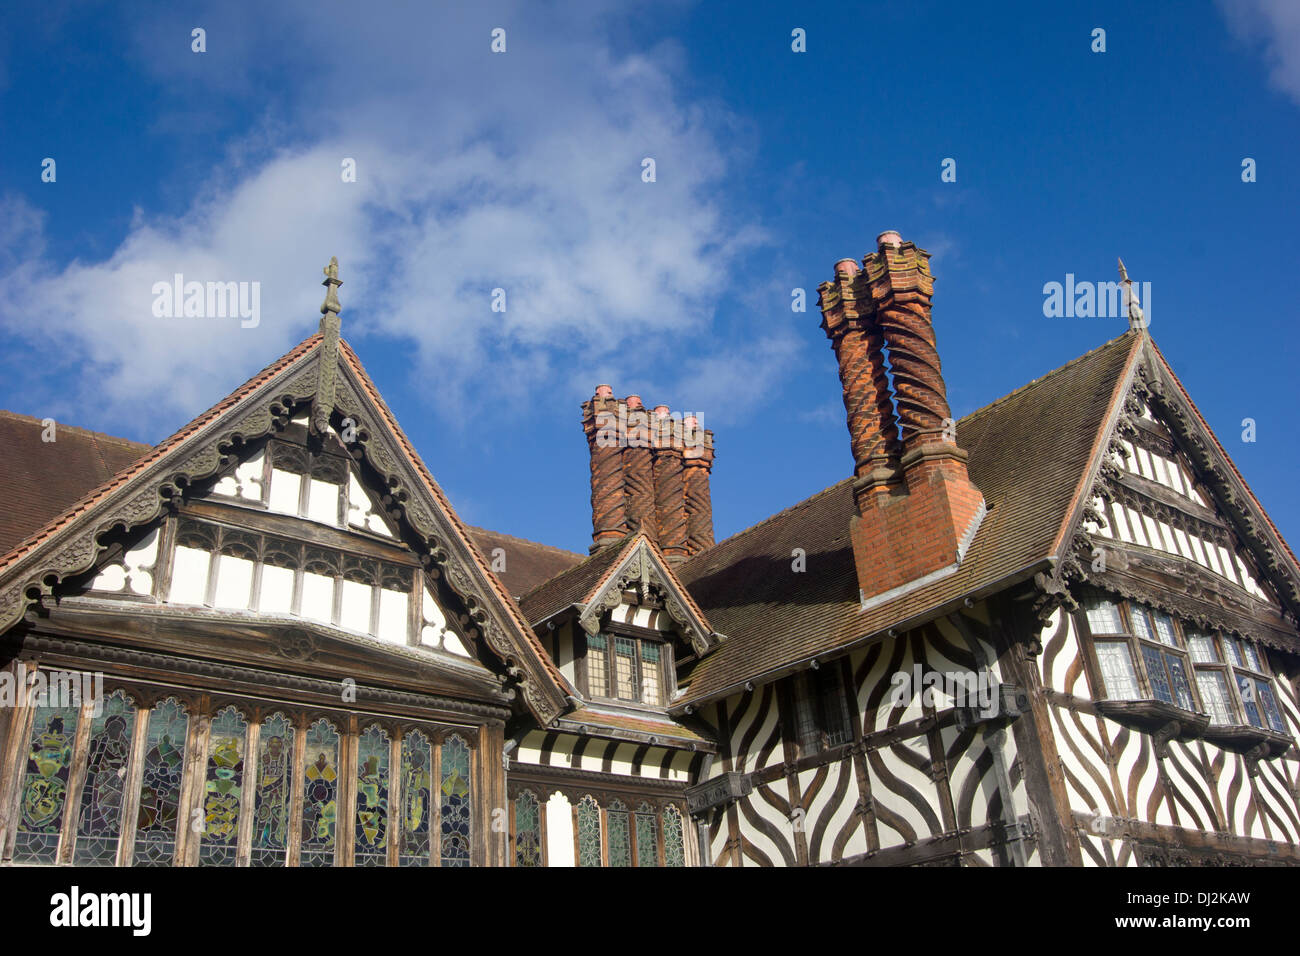 Wightwick Manor is a Victorian manor house located on Wightwick Bank, Wolverhampton, West Midlands, England. Stock Photo